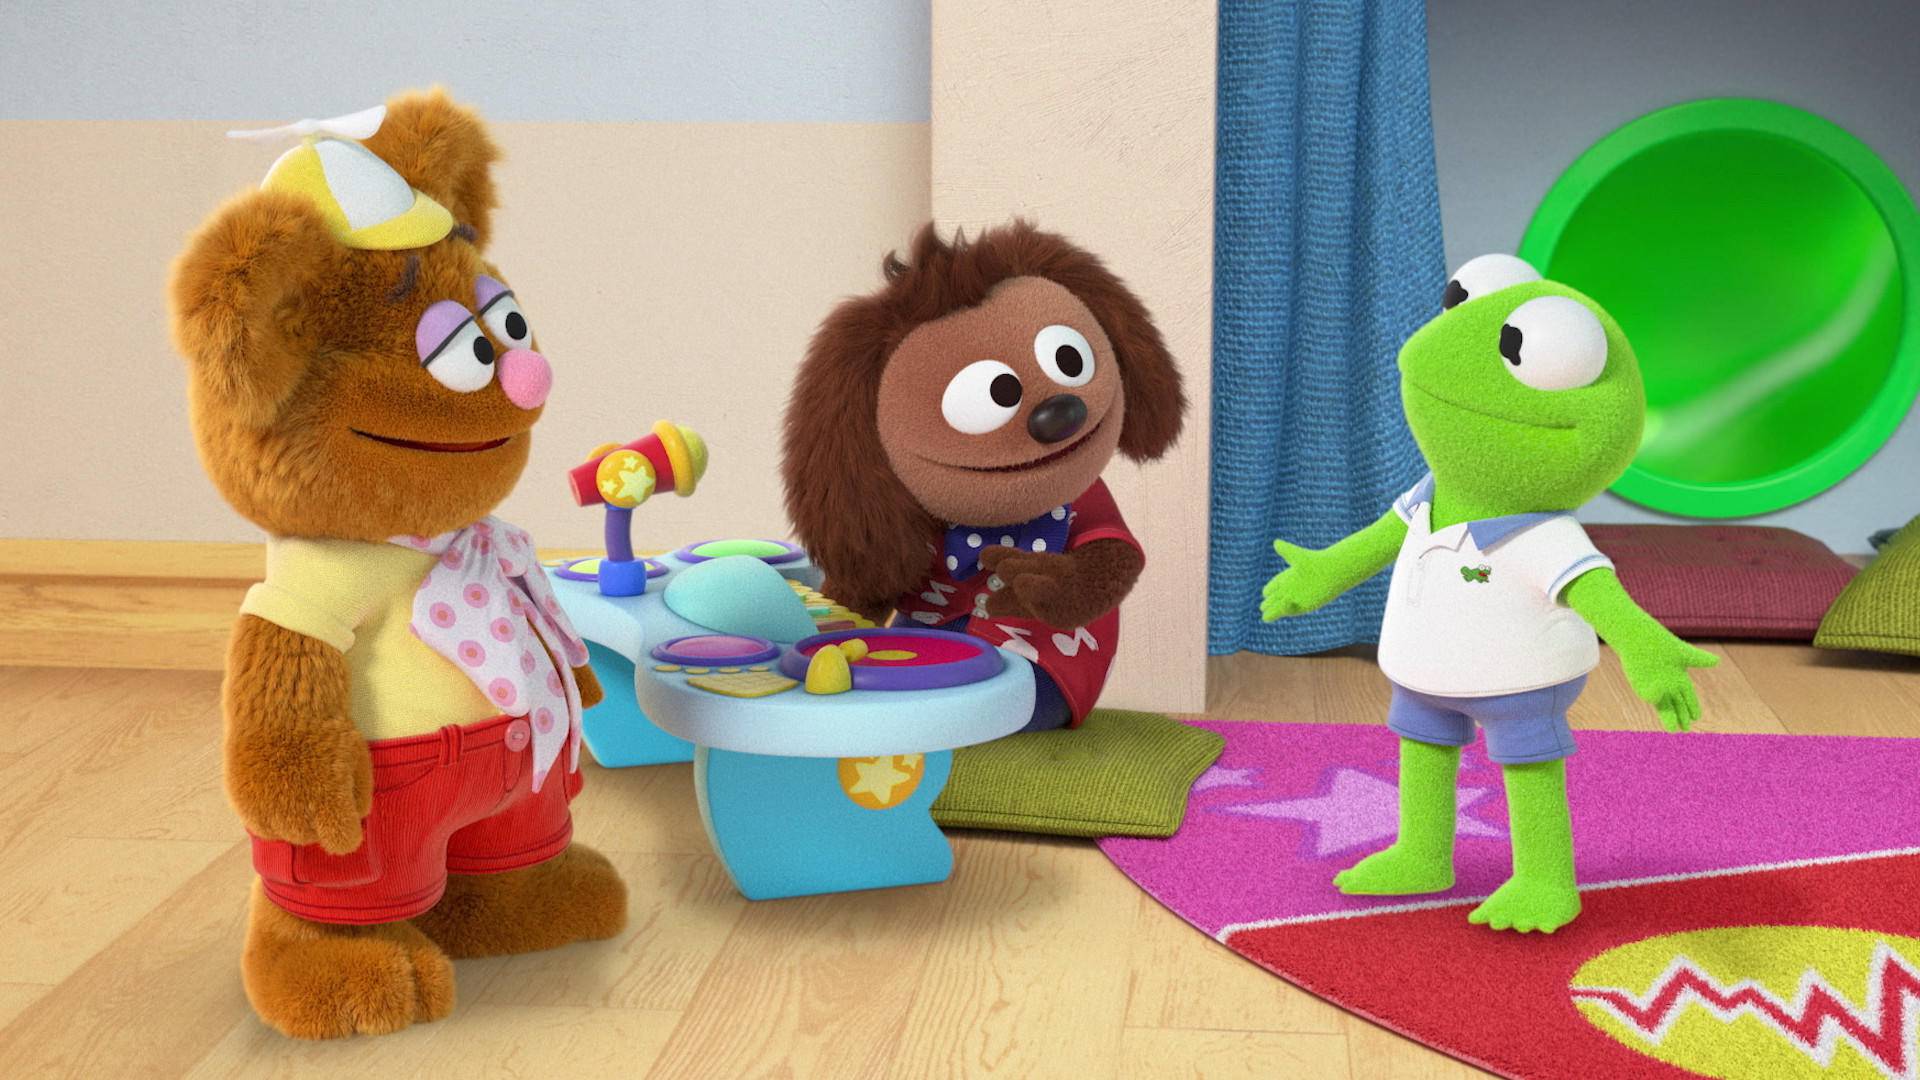 Watch Rowlf the Dog make his 'Muppet Babies' debut in this exclusive clip